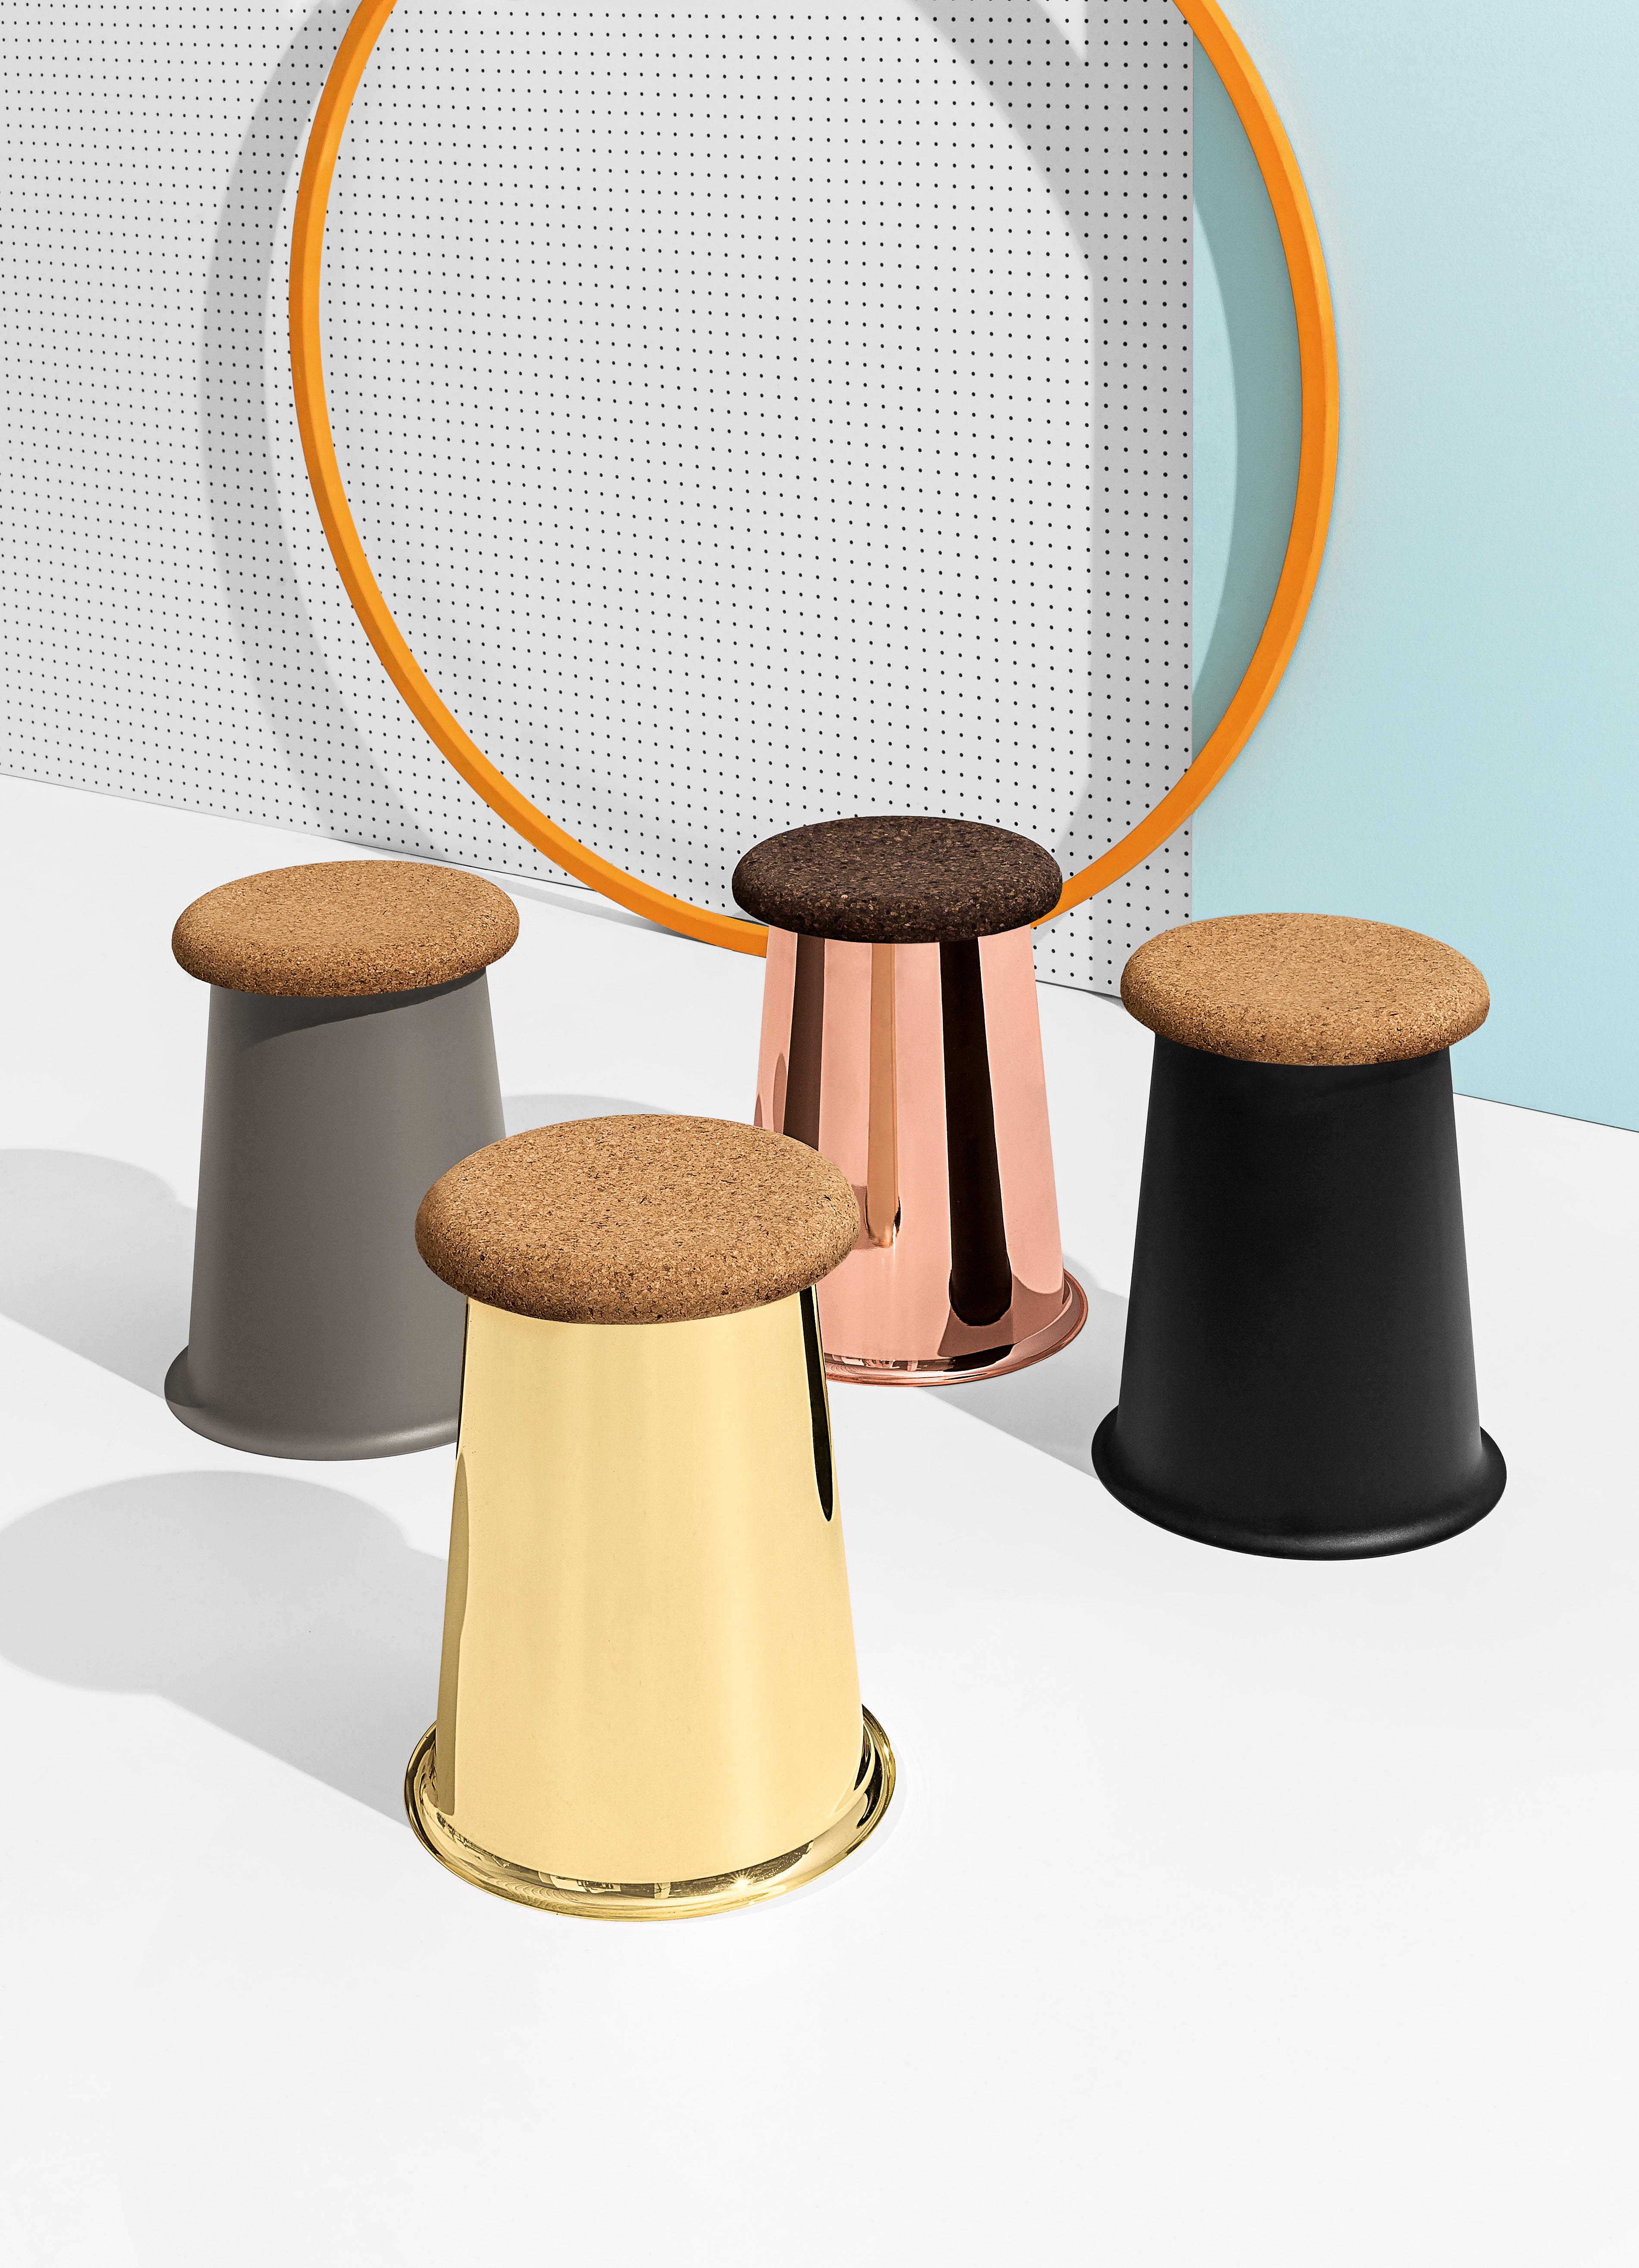 Stool with polished copper base and seating in dark cork. 

Siit is an invitation to sit down and relax. Siit is a multifunctional stool with a minimal design and refined details. It merges functionality and sustainability thanks to its cork seat,